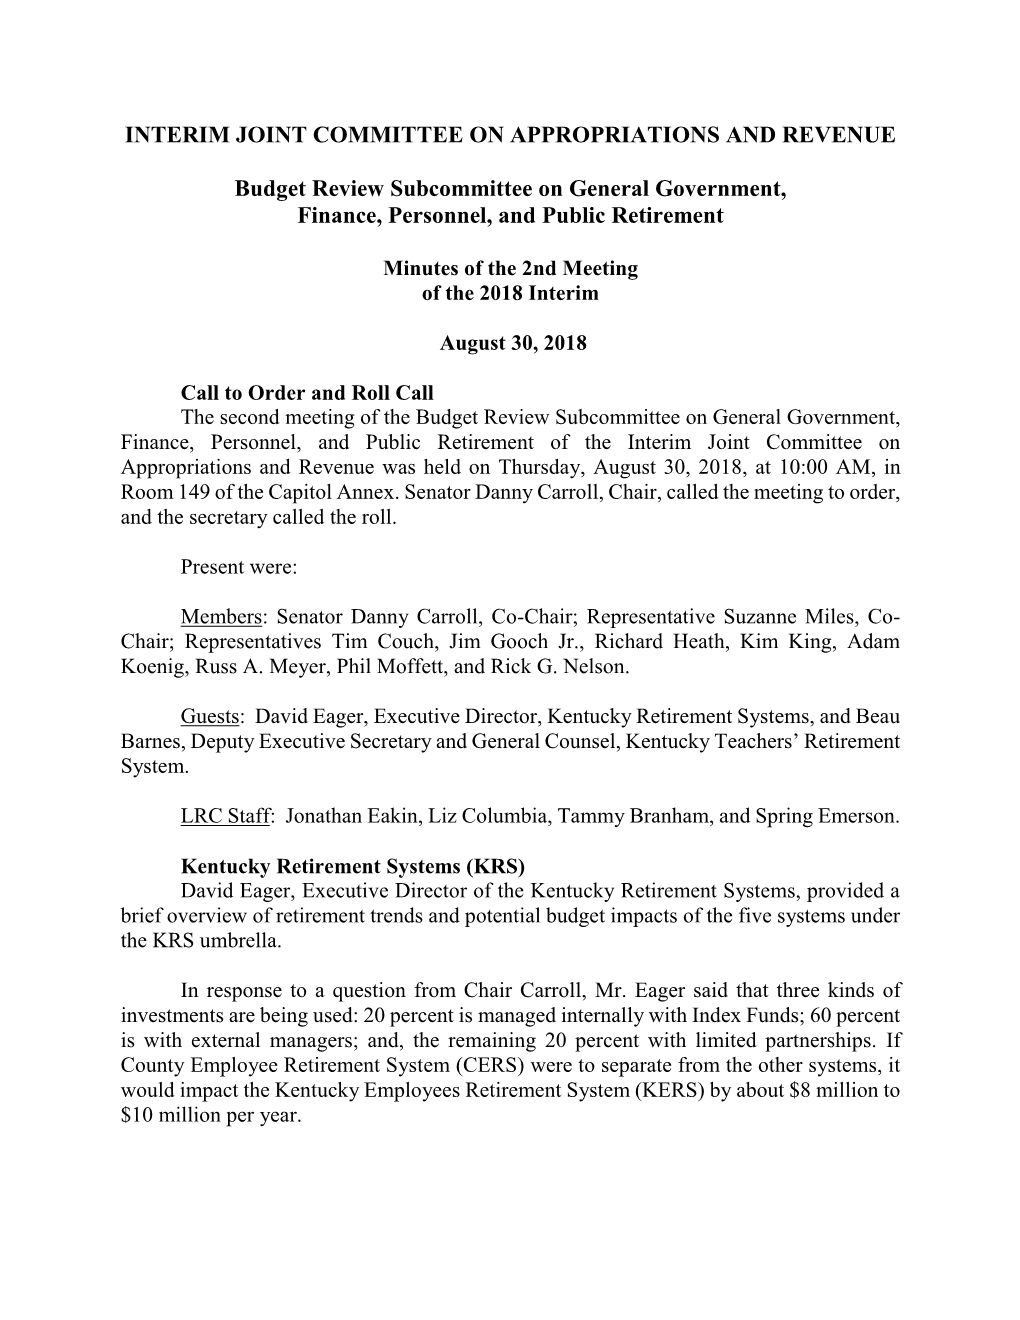 Interim Joint Committee on Appropriations and Revenue